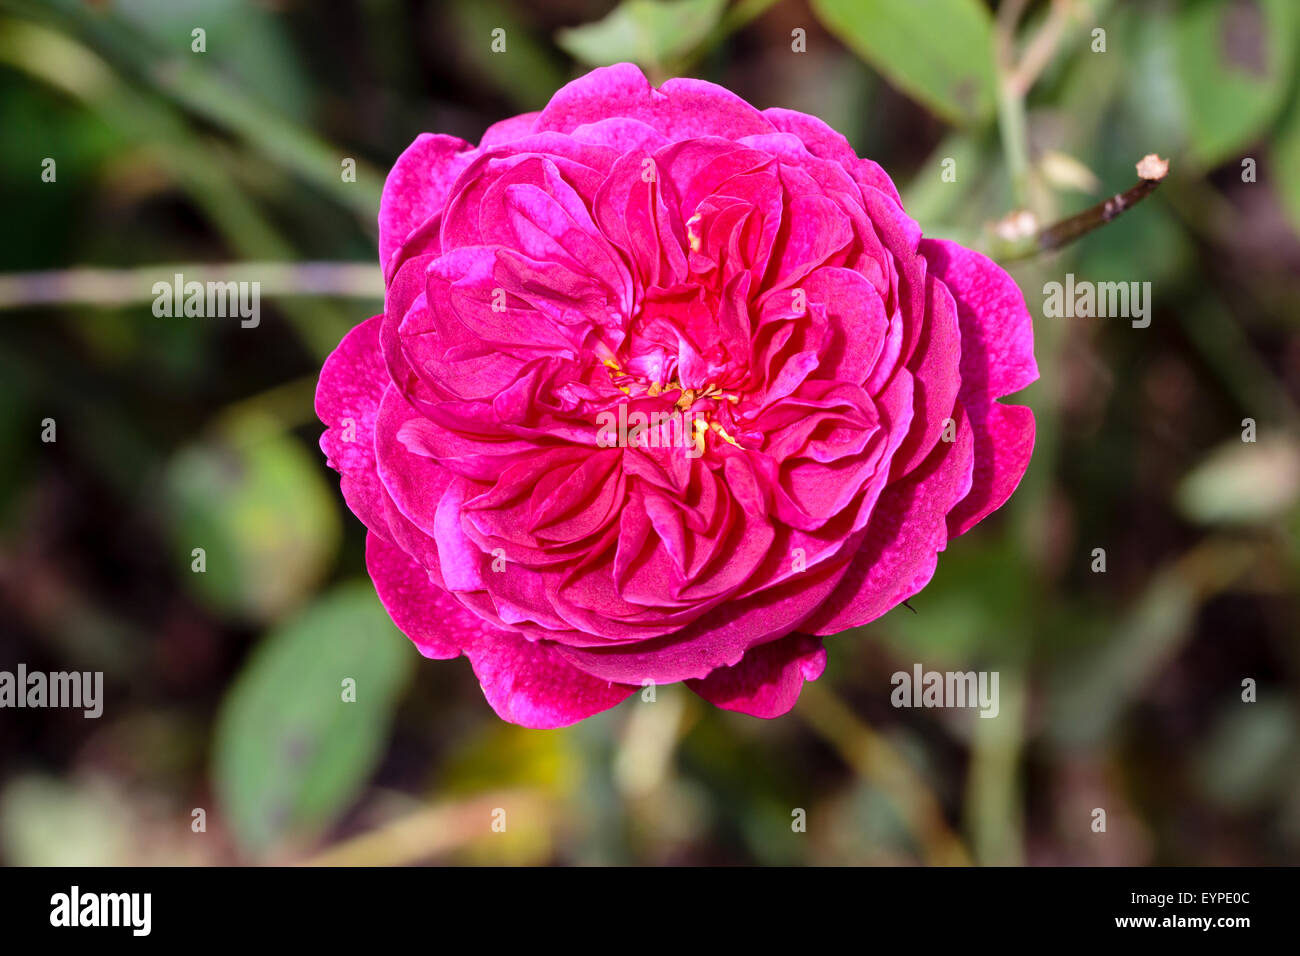 Flower of the David Austin bred English rose, 'Darcy Bussell' Stock Photo